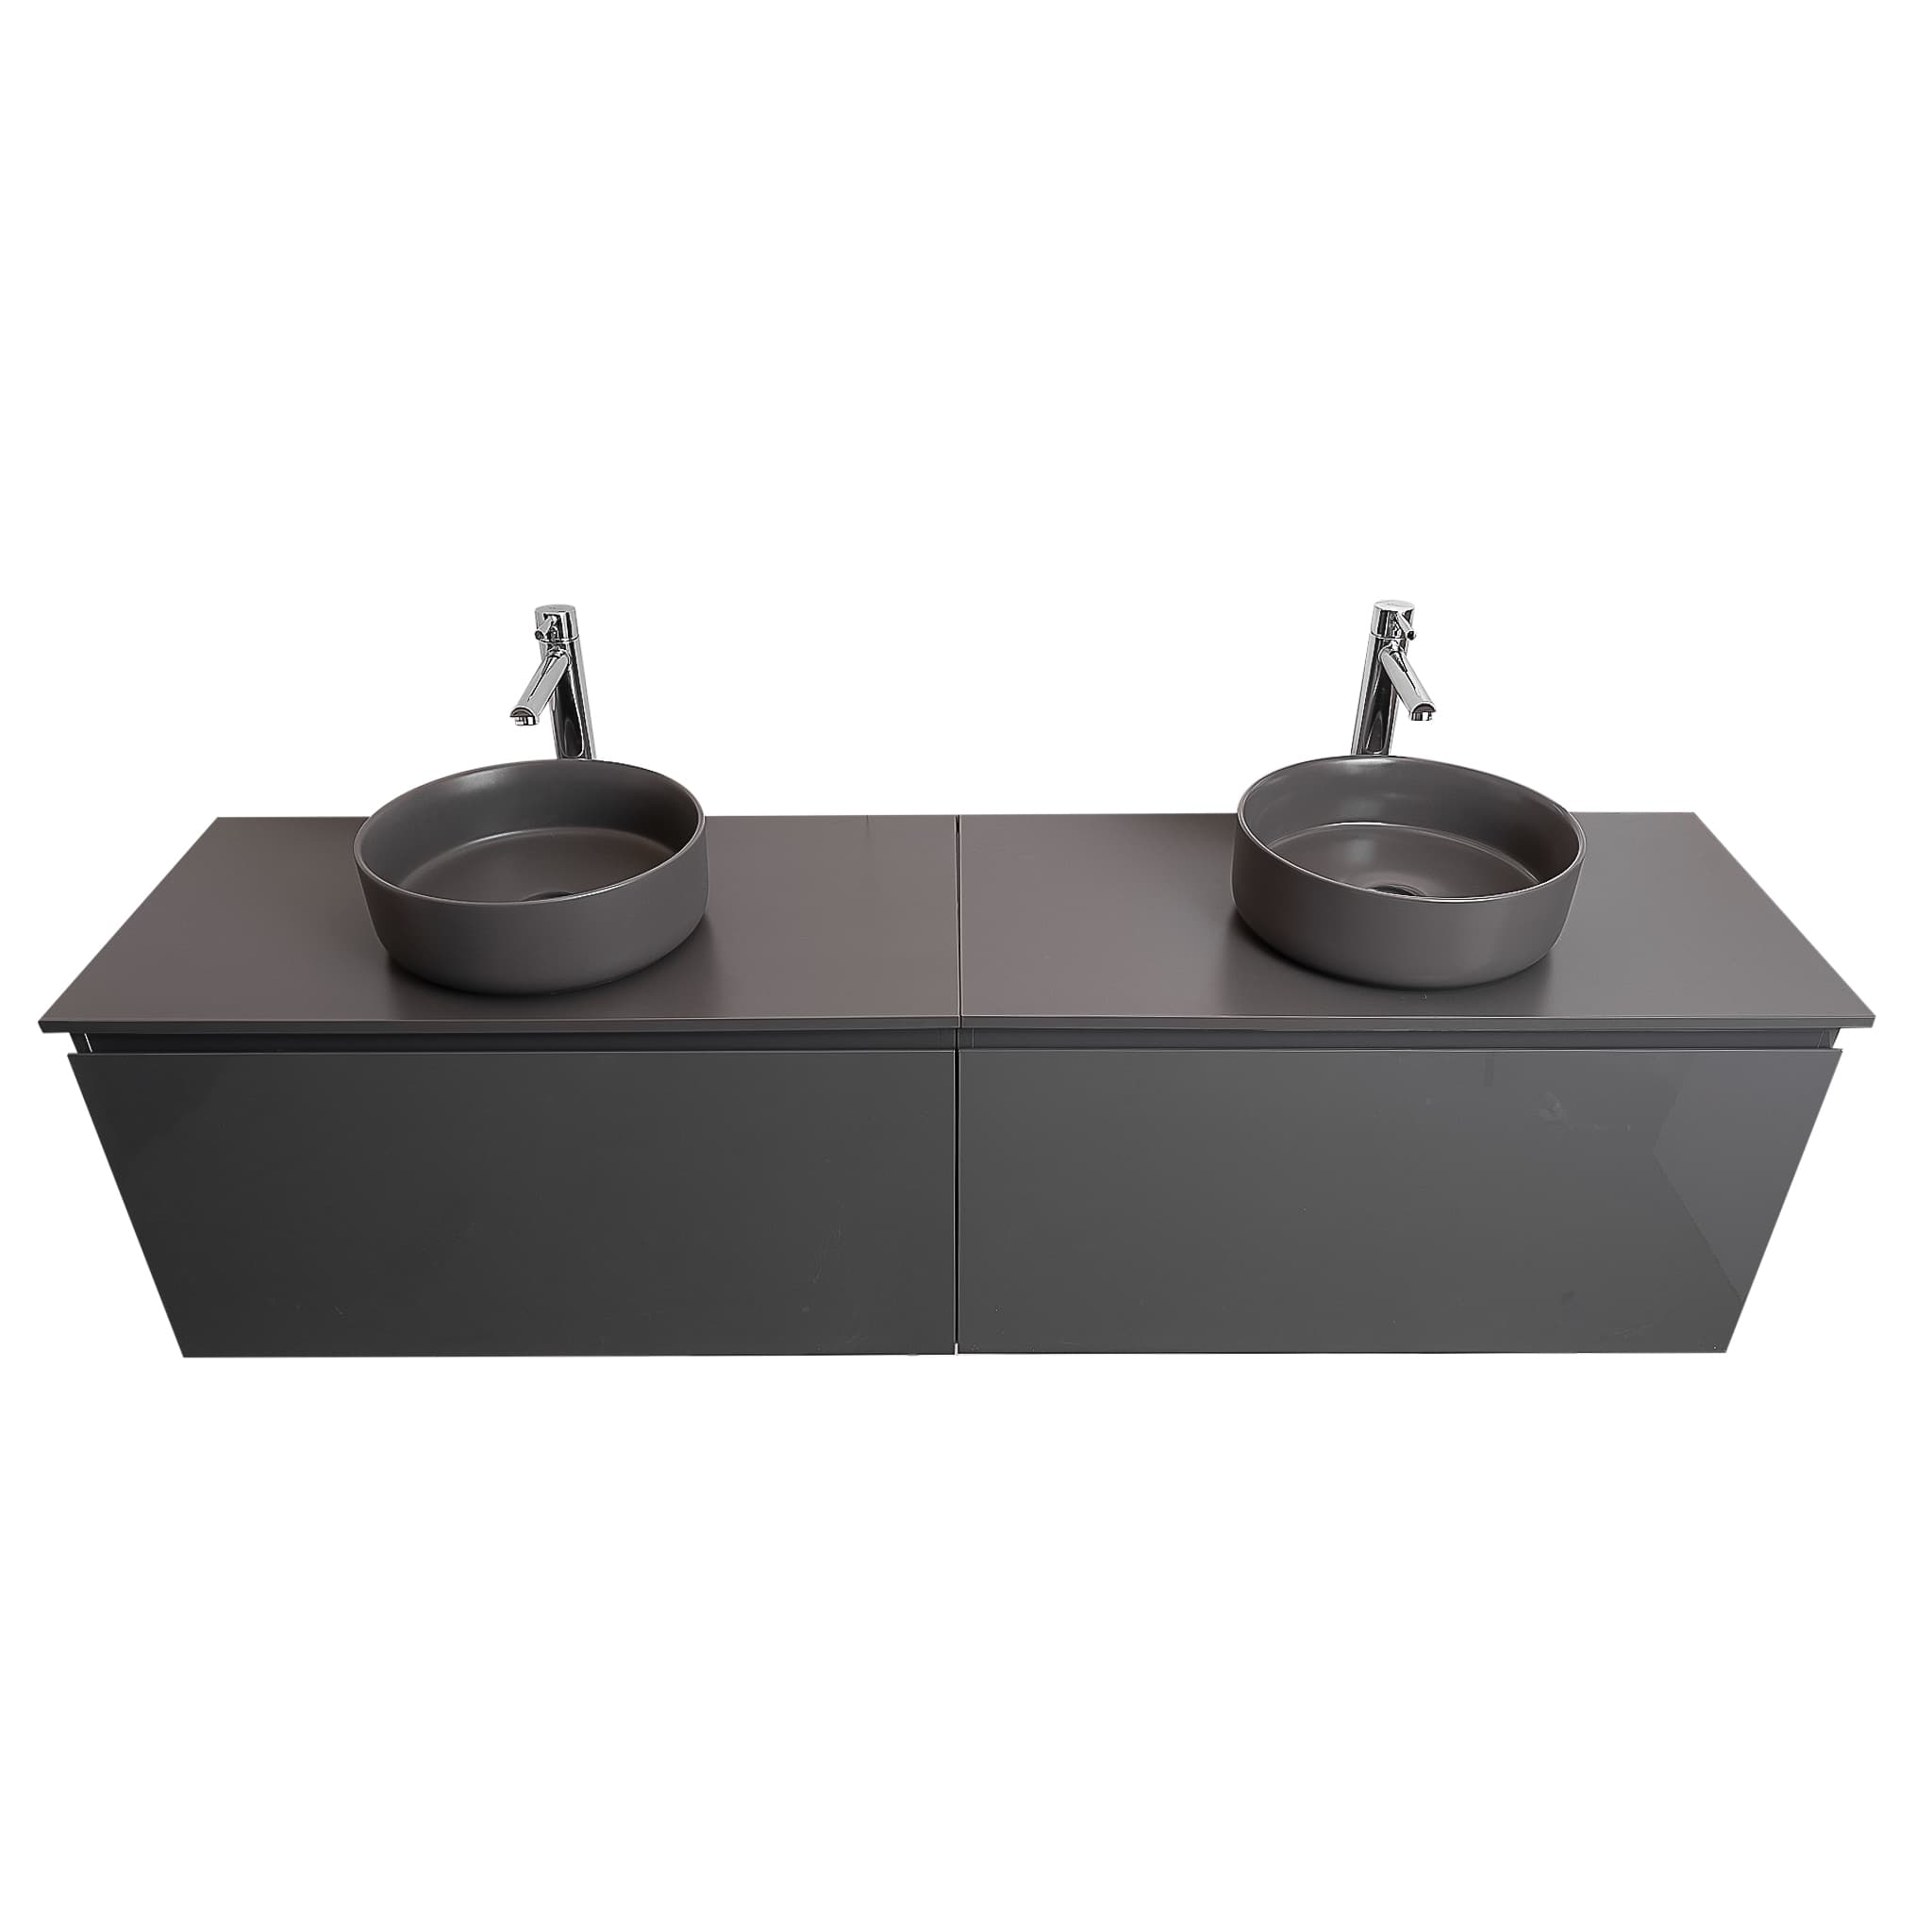 Venice 63 Anthracite High Gloss Cabinet, Ares Grey Ceniza Top And Two Ares Grey Ceniza Ceramic Basin, Wall Mounted Modern Vanity Set